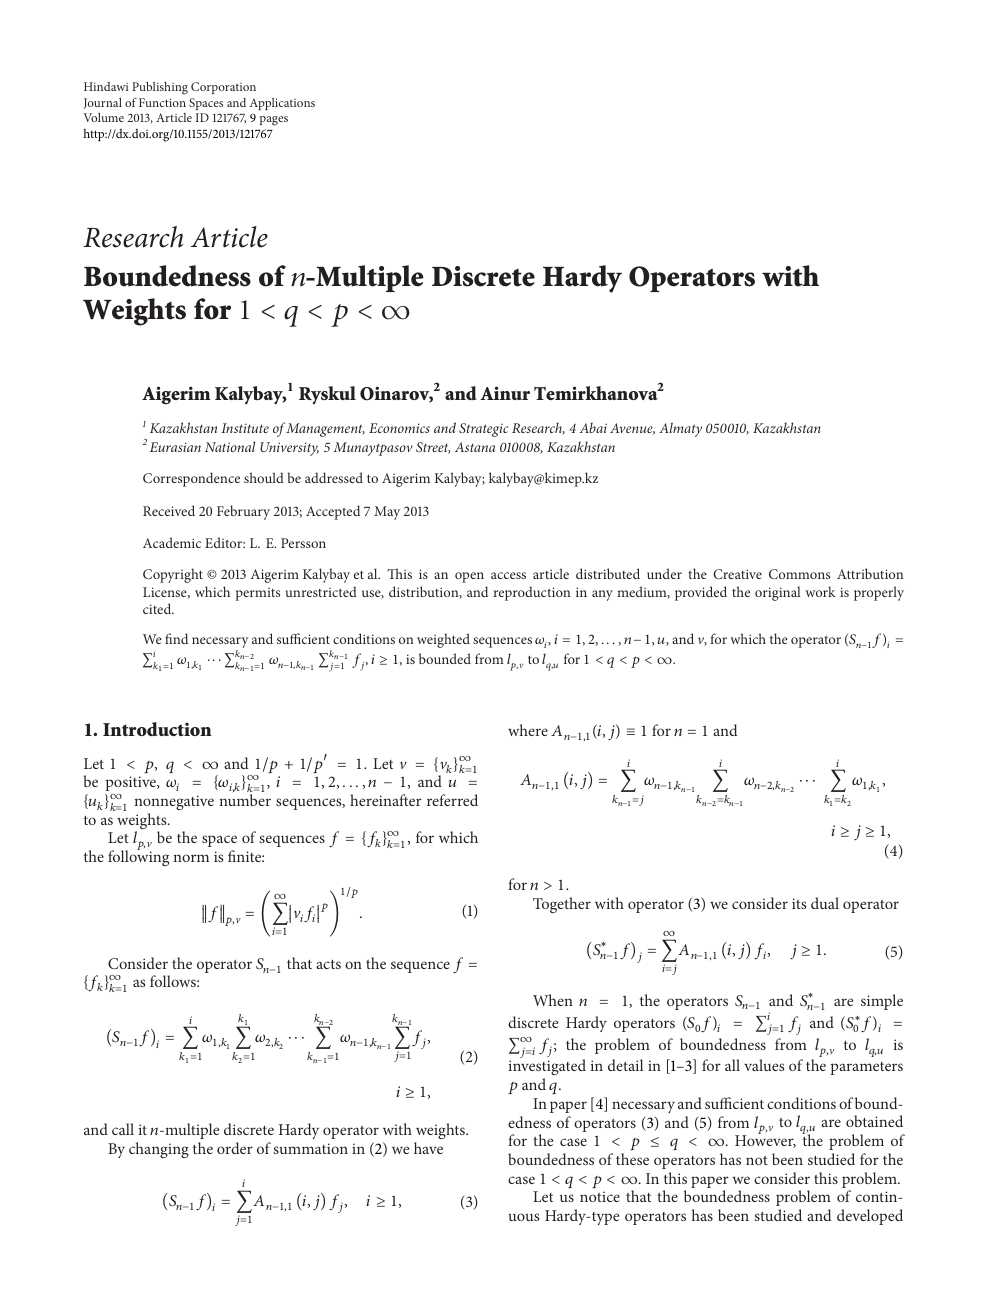 Boundedness Of Multiple Discrete Hardy Operators With Weights For Topic Of Research Paper In Mathematics Download Scholarly Article Pdf And Read For Free On Cyberleninka Open Science Hub